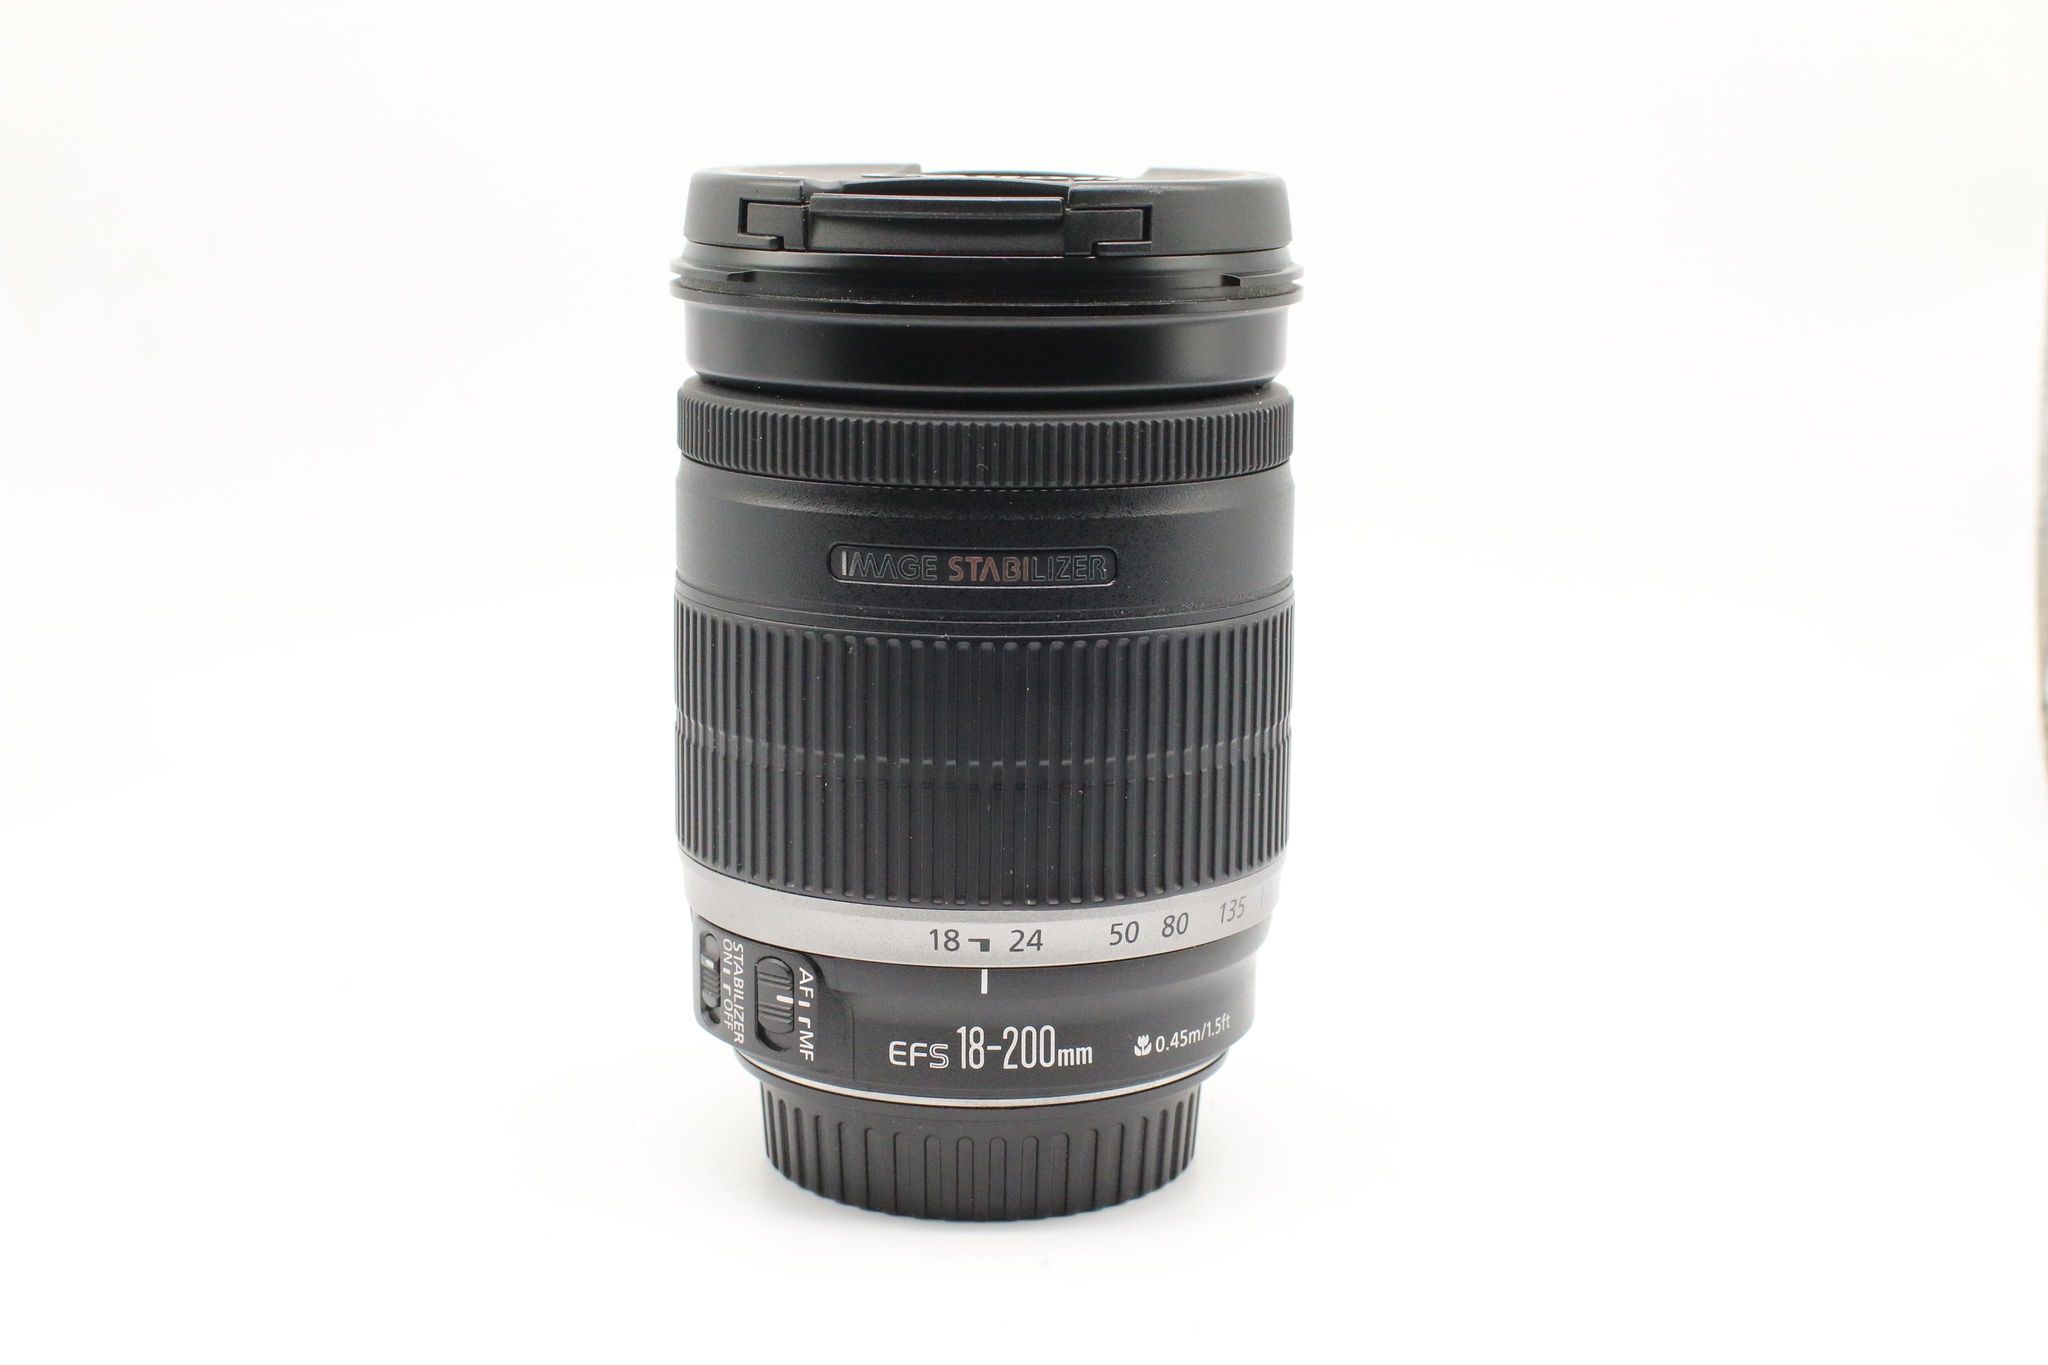 ong-kinh-canon-ef-s-18-200mm-f-3-5-5-6-is